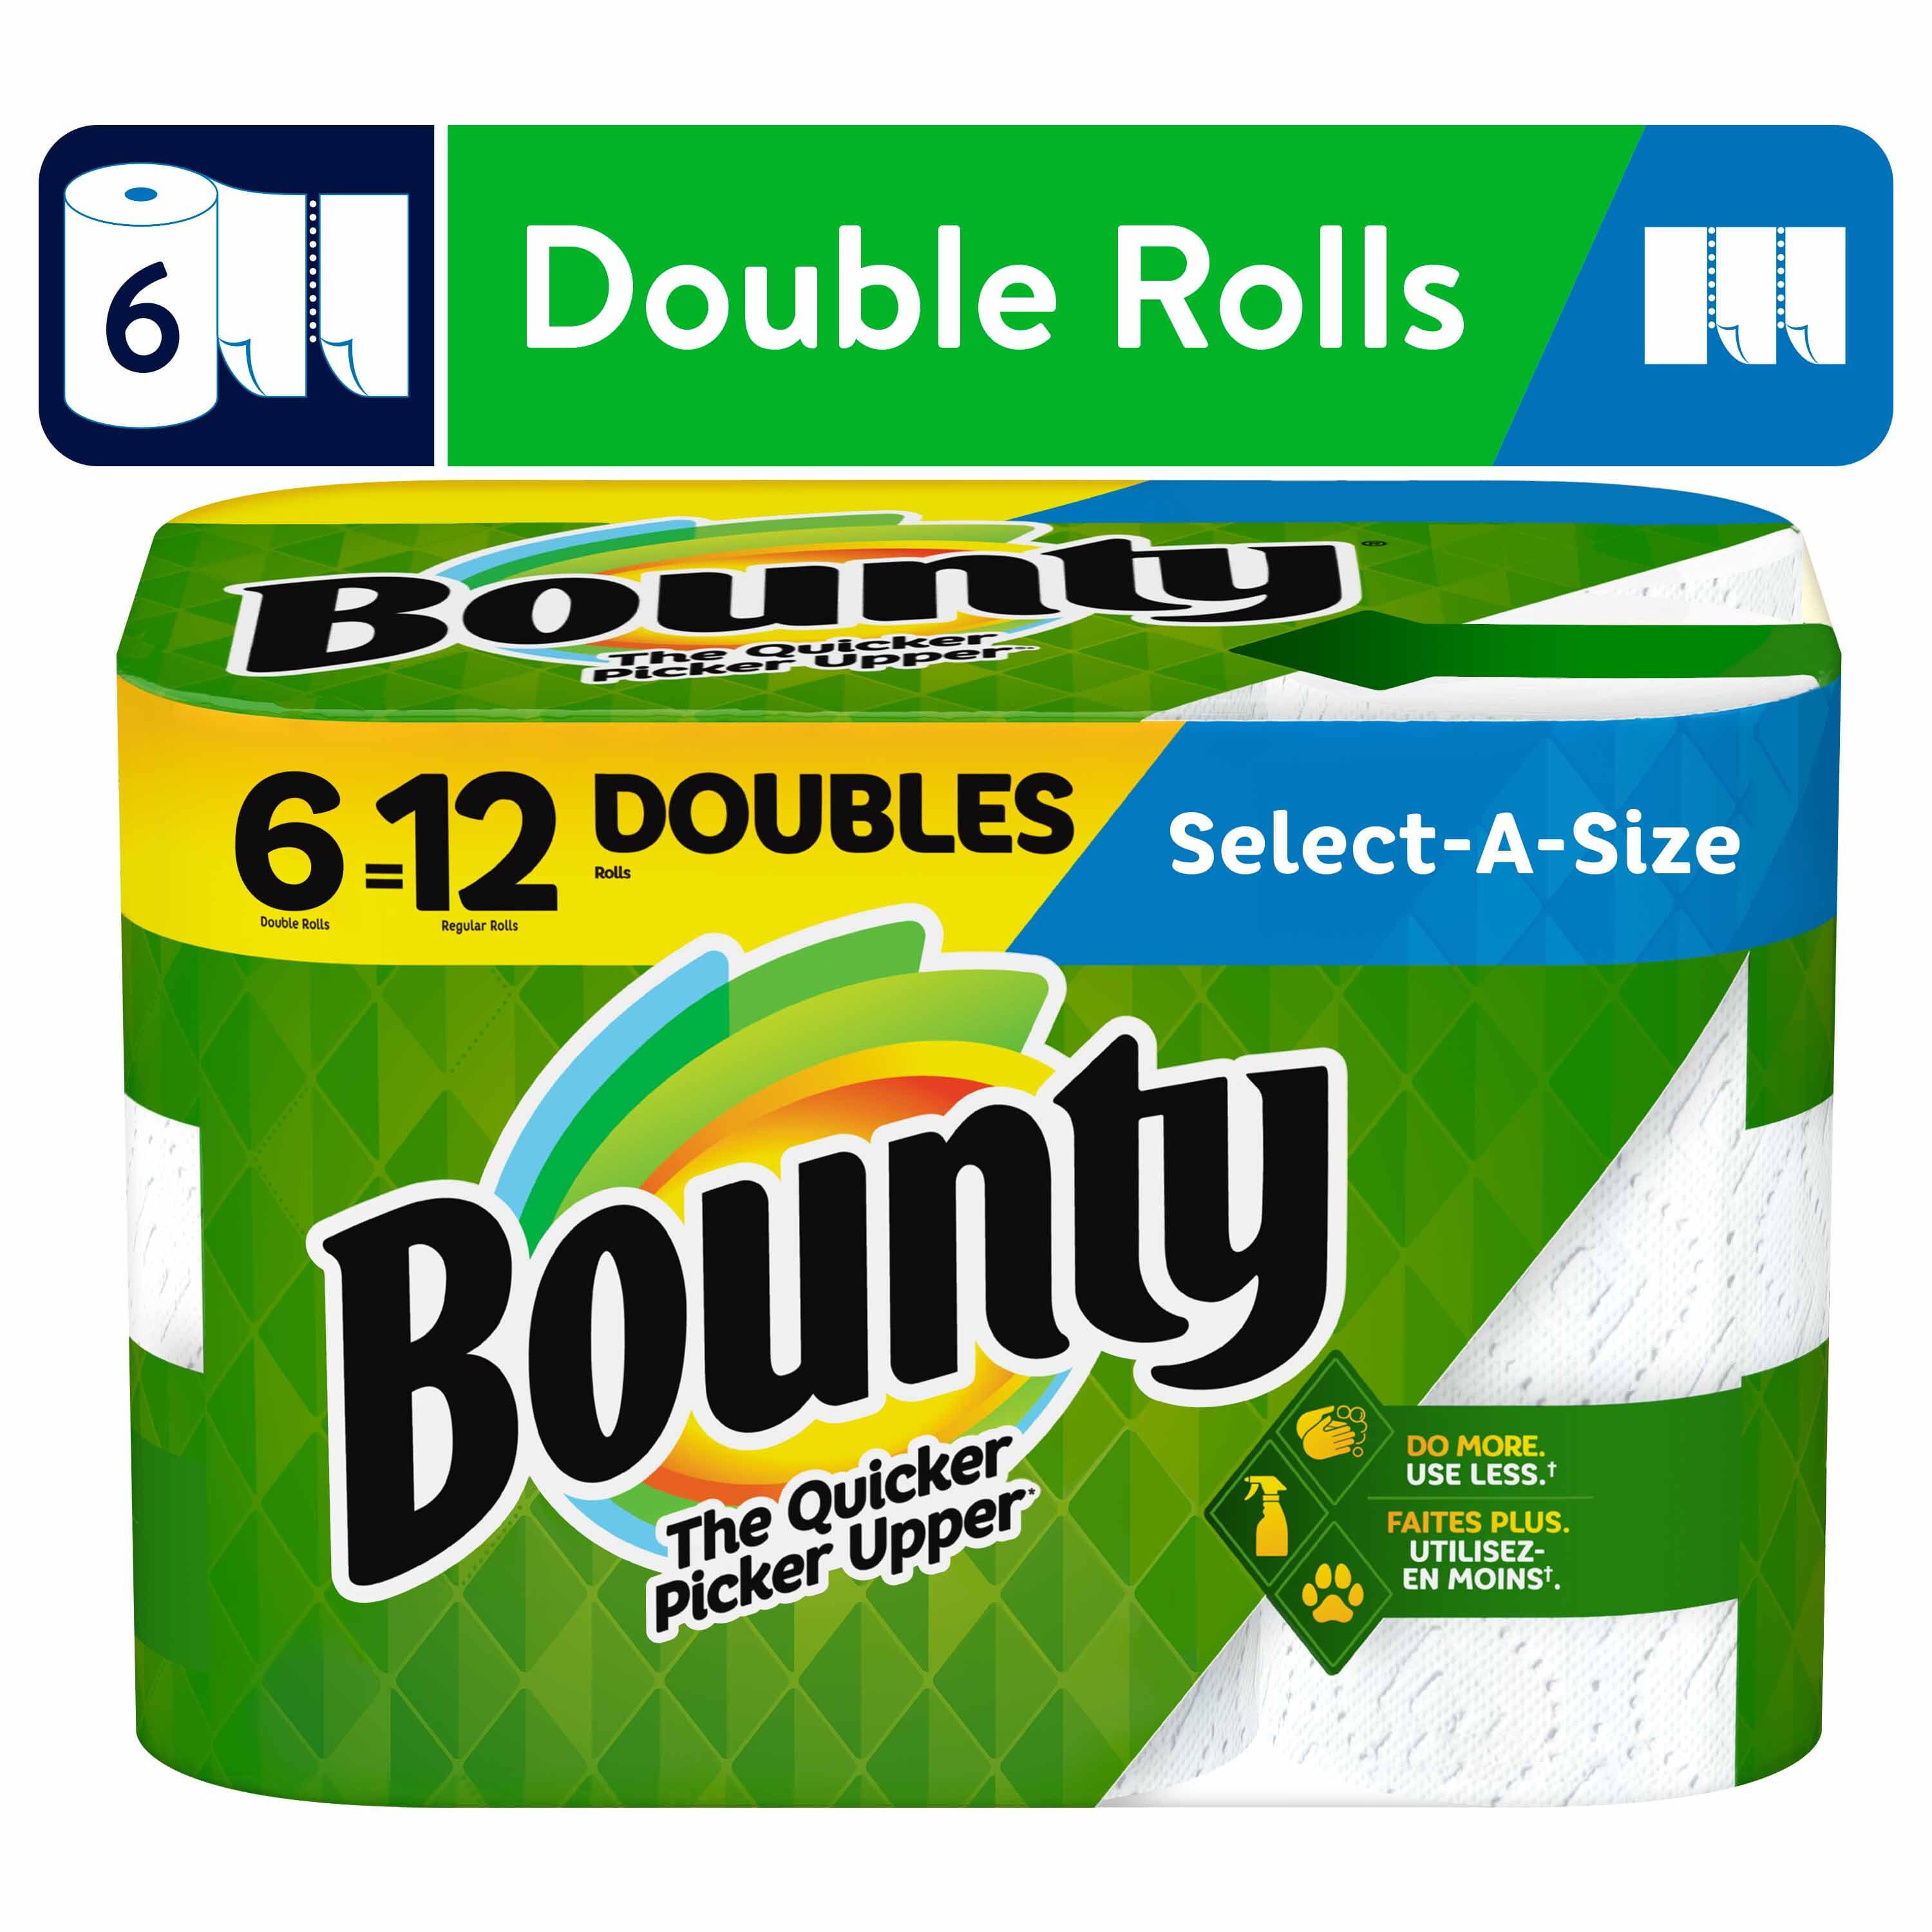 6 Double Rolls for cleaning